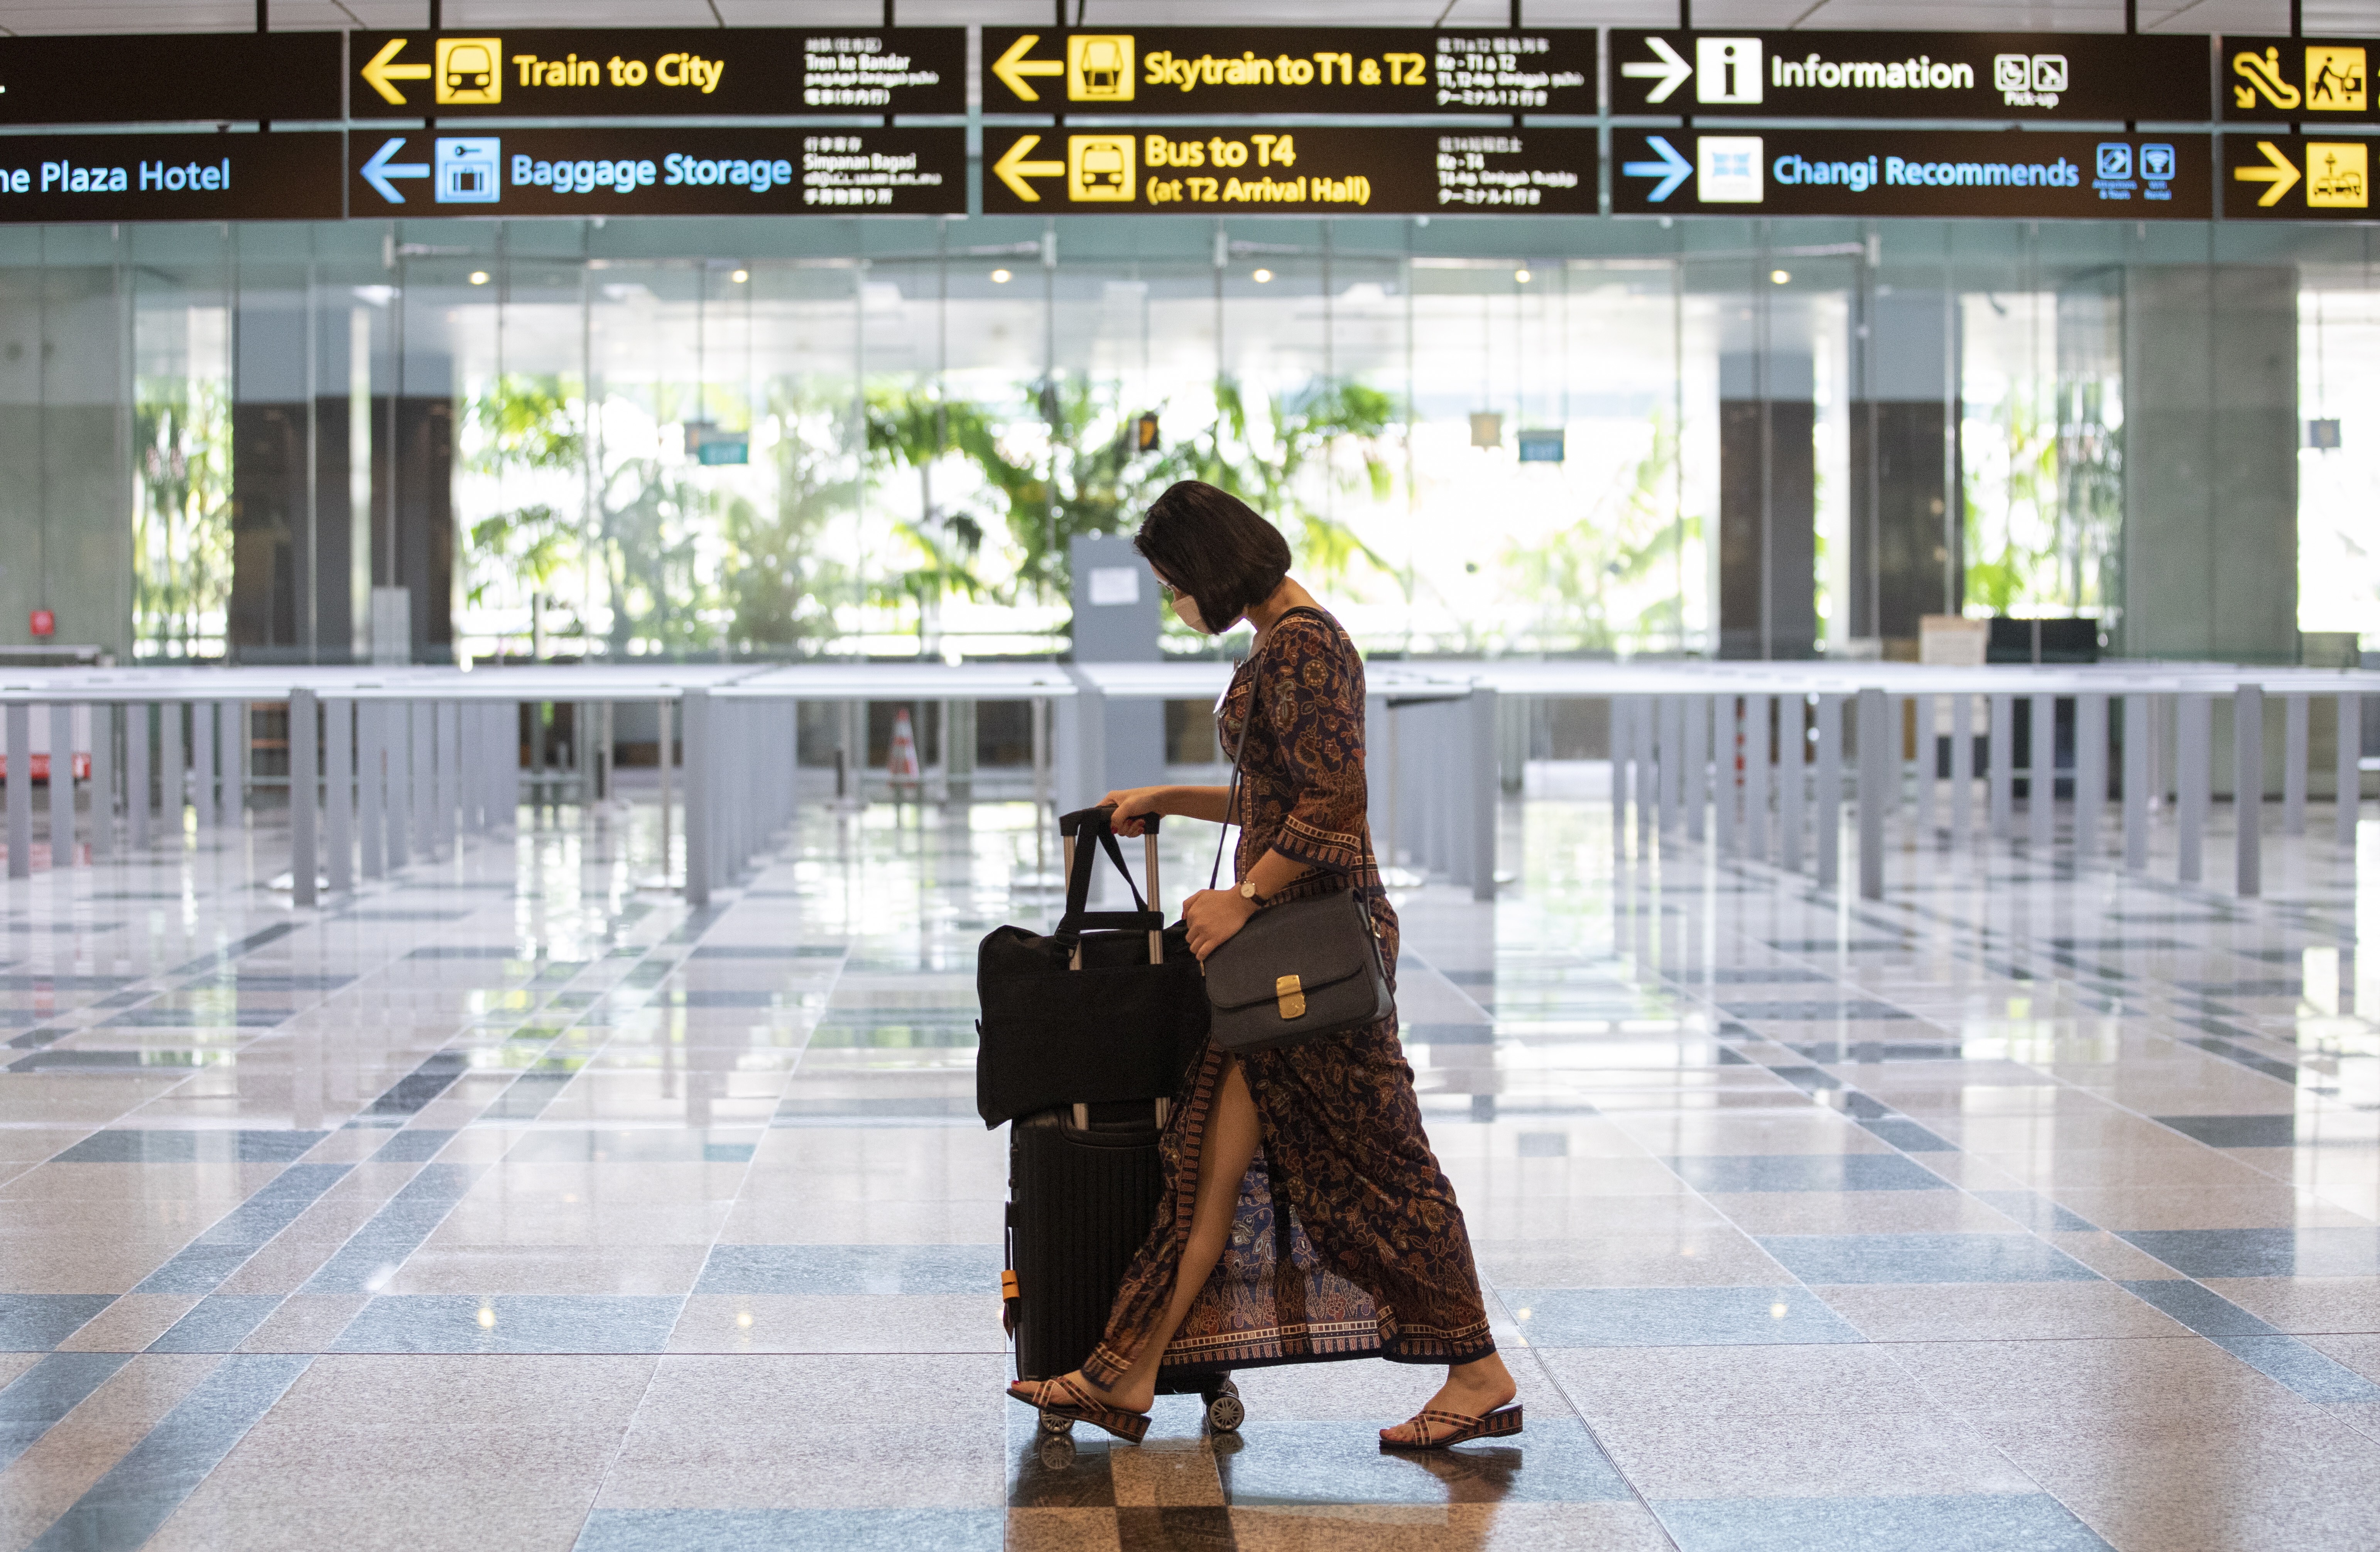 Some lucky passengers get to land at Changi Airport Terminal 2 for